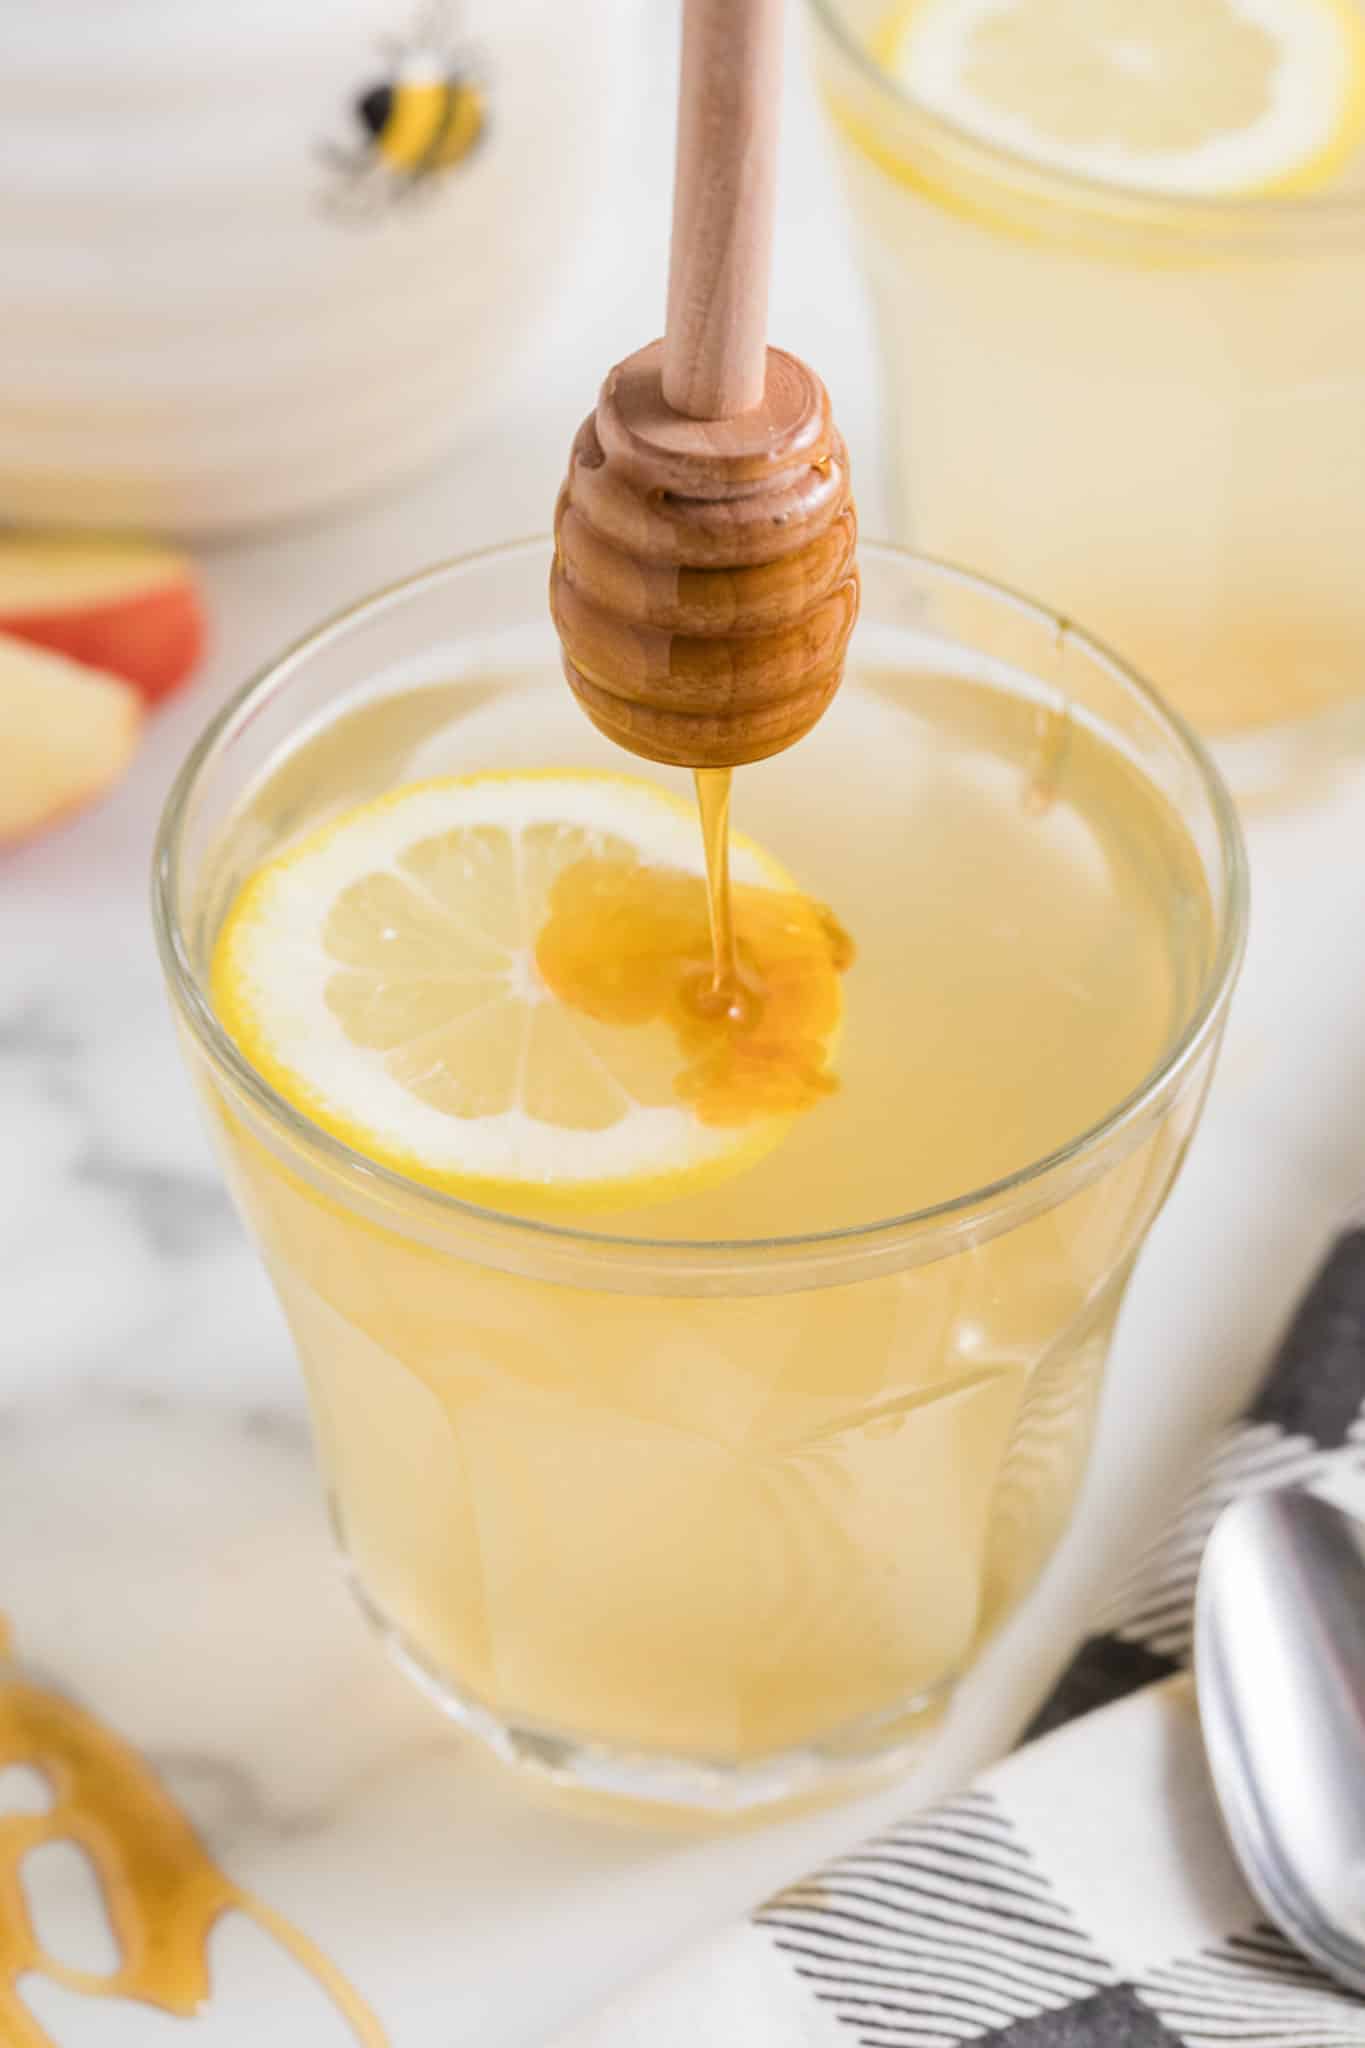 Drizzling honey into a glass of lemon ACV drink.